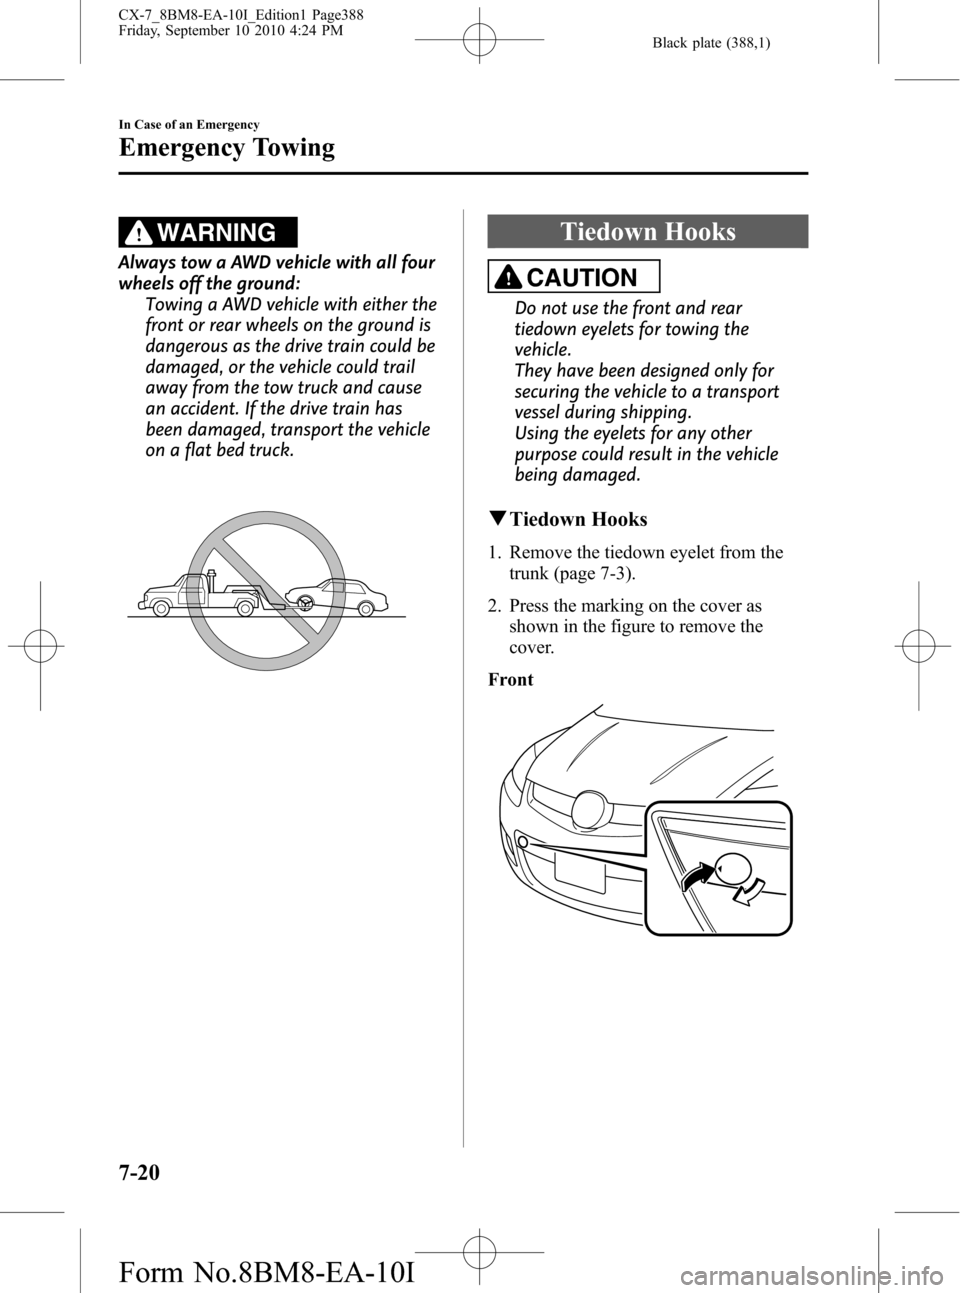 MAZDA MODEL CX-7 2011  Owners Manual (in English) Black plate (388,1)
WARNING
Always tow a AWD vehicle with all four
wheels off the ground:
Towing a AWD vehicle with either the
front or rear wheels on the ground is
dangerous as the drive train could 